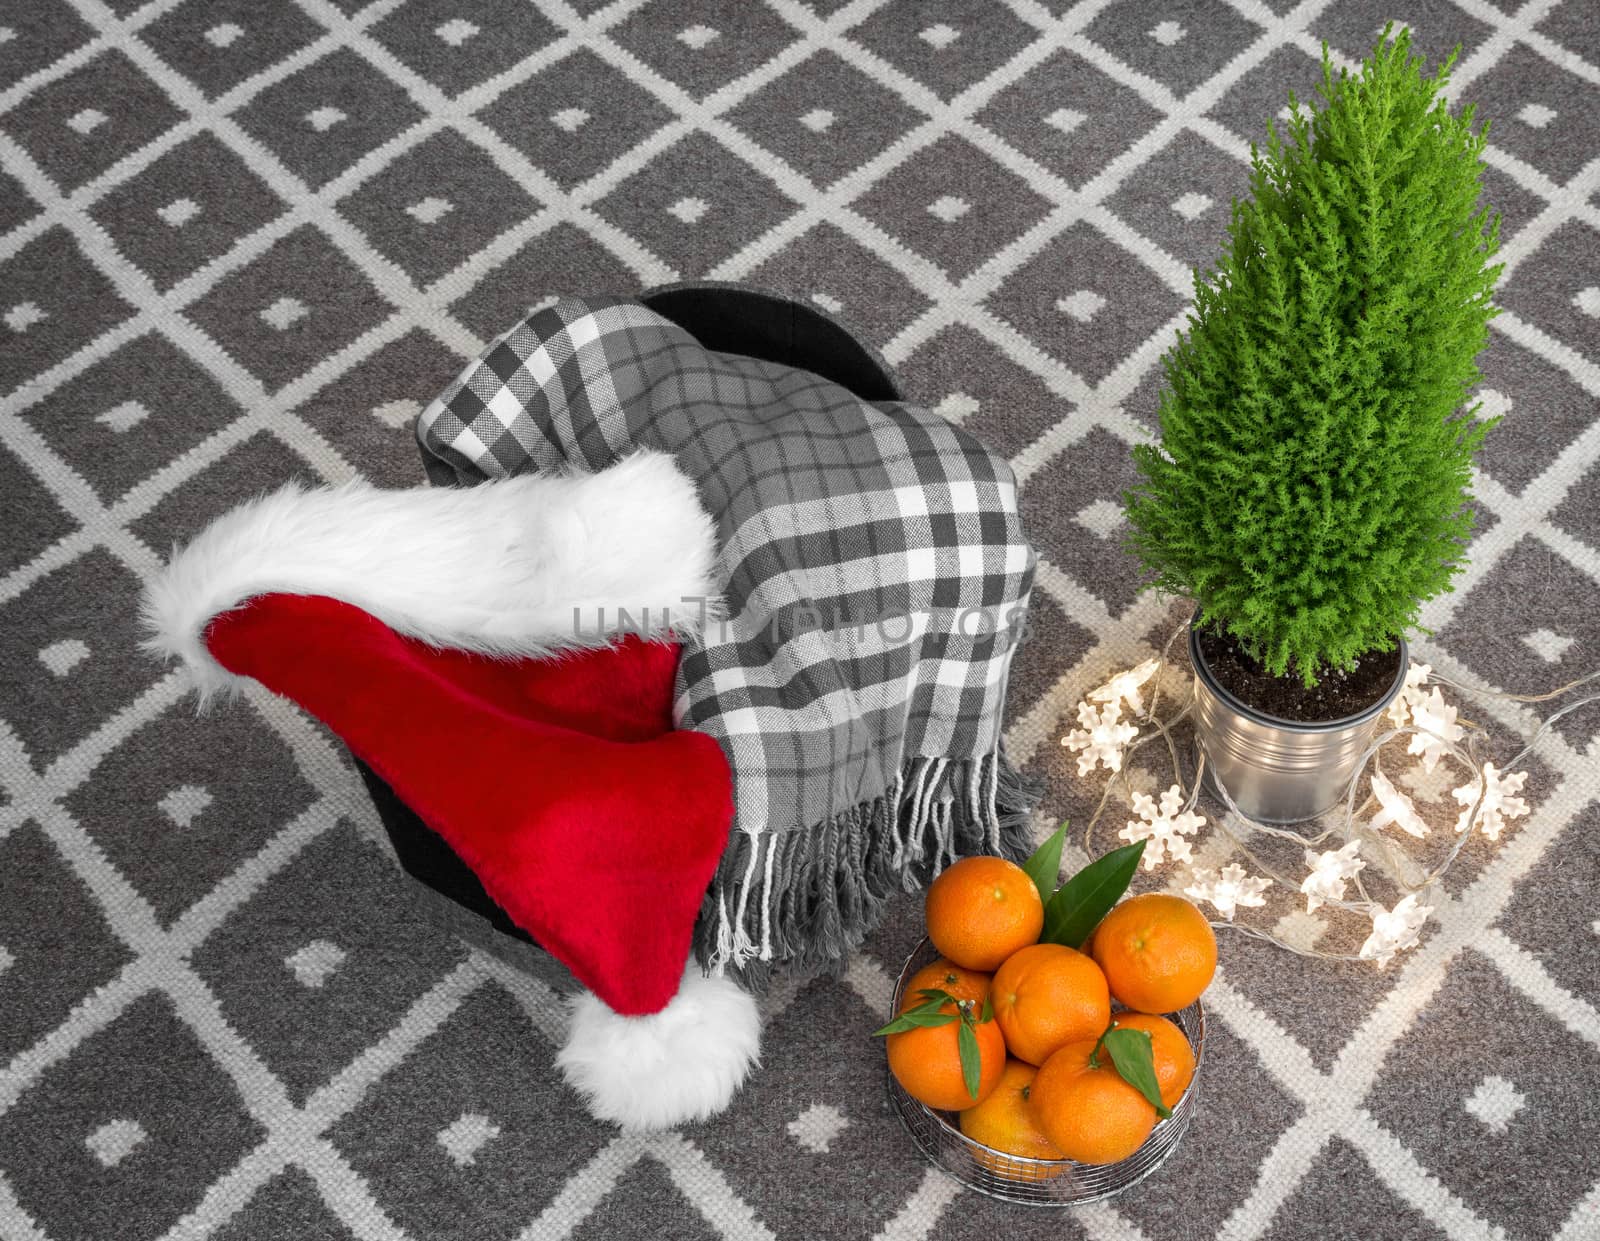 Christmas composition. Santa hat, lights, checked plaid, clementines, and little green tree.